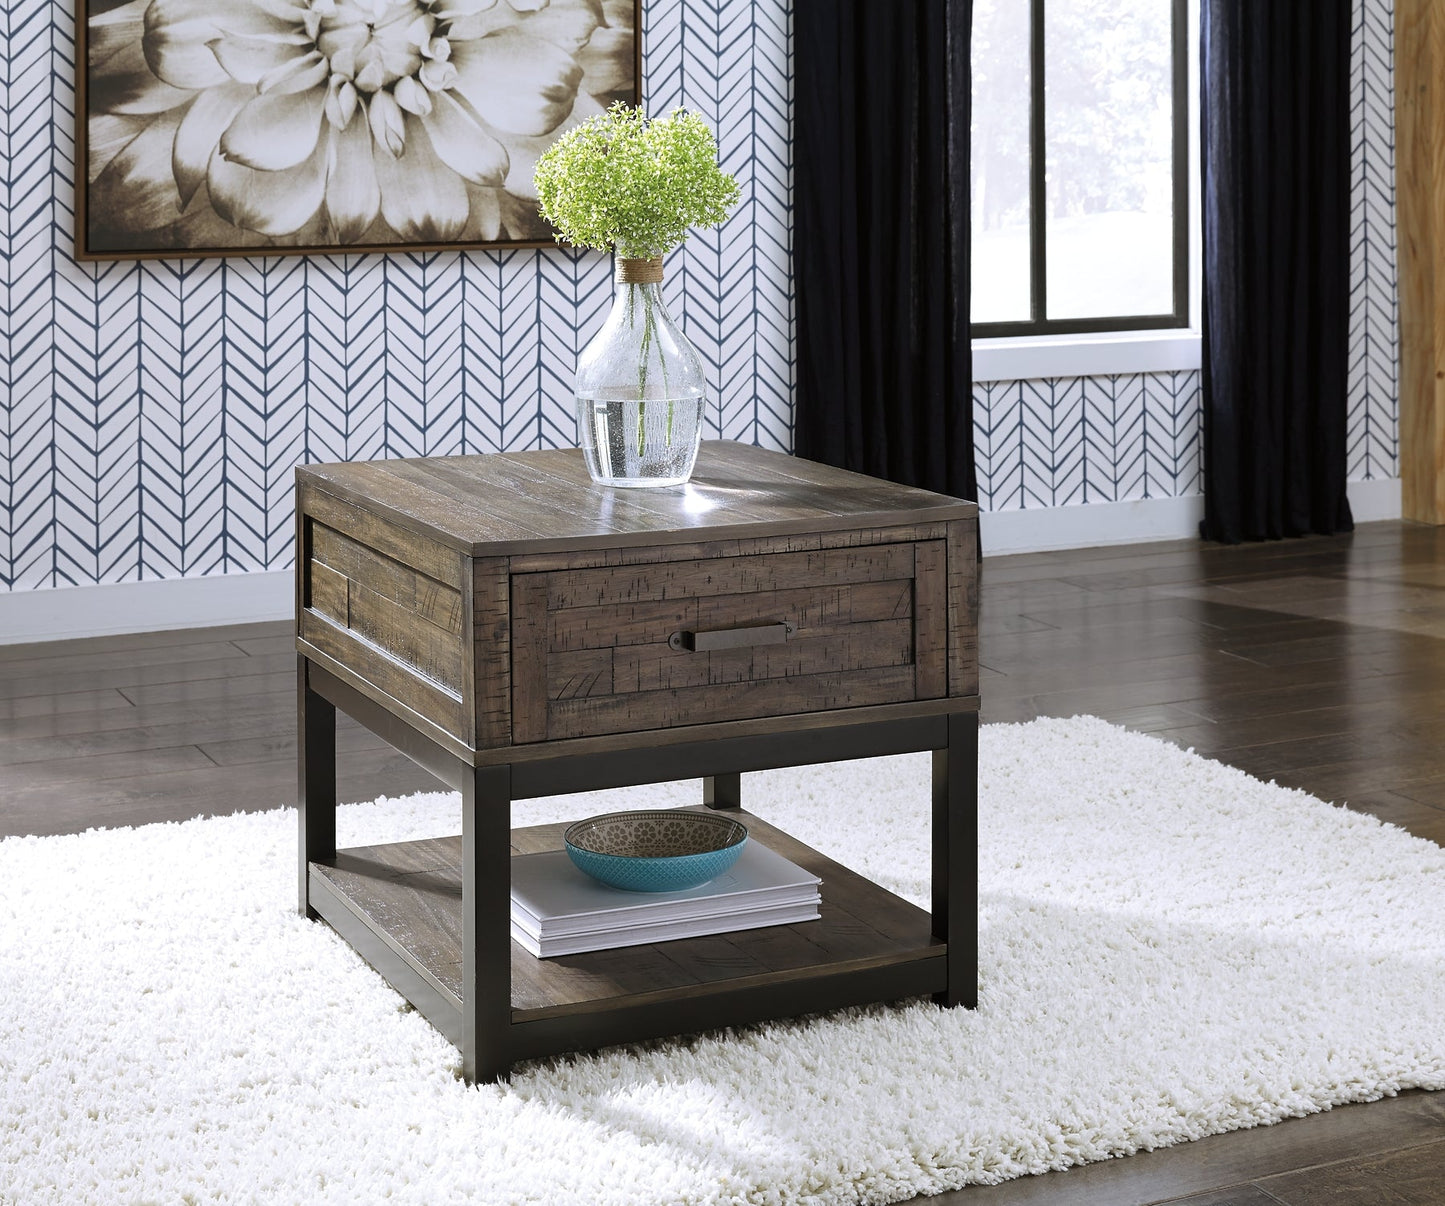 Johurst 2 End Tables Rent Wise Rent To Own Jacksonville, Florida